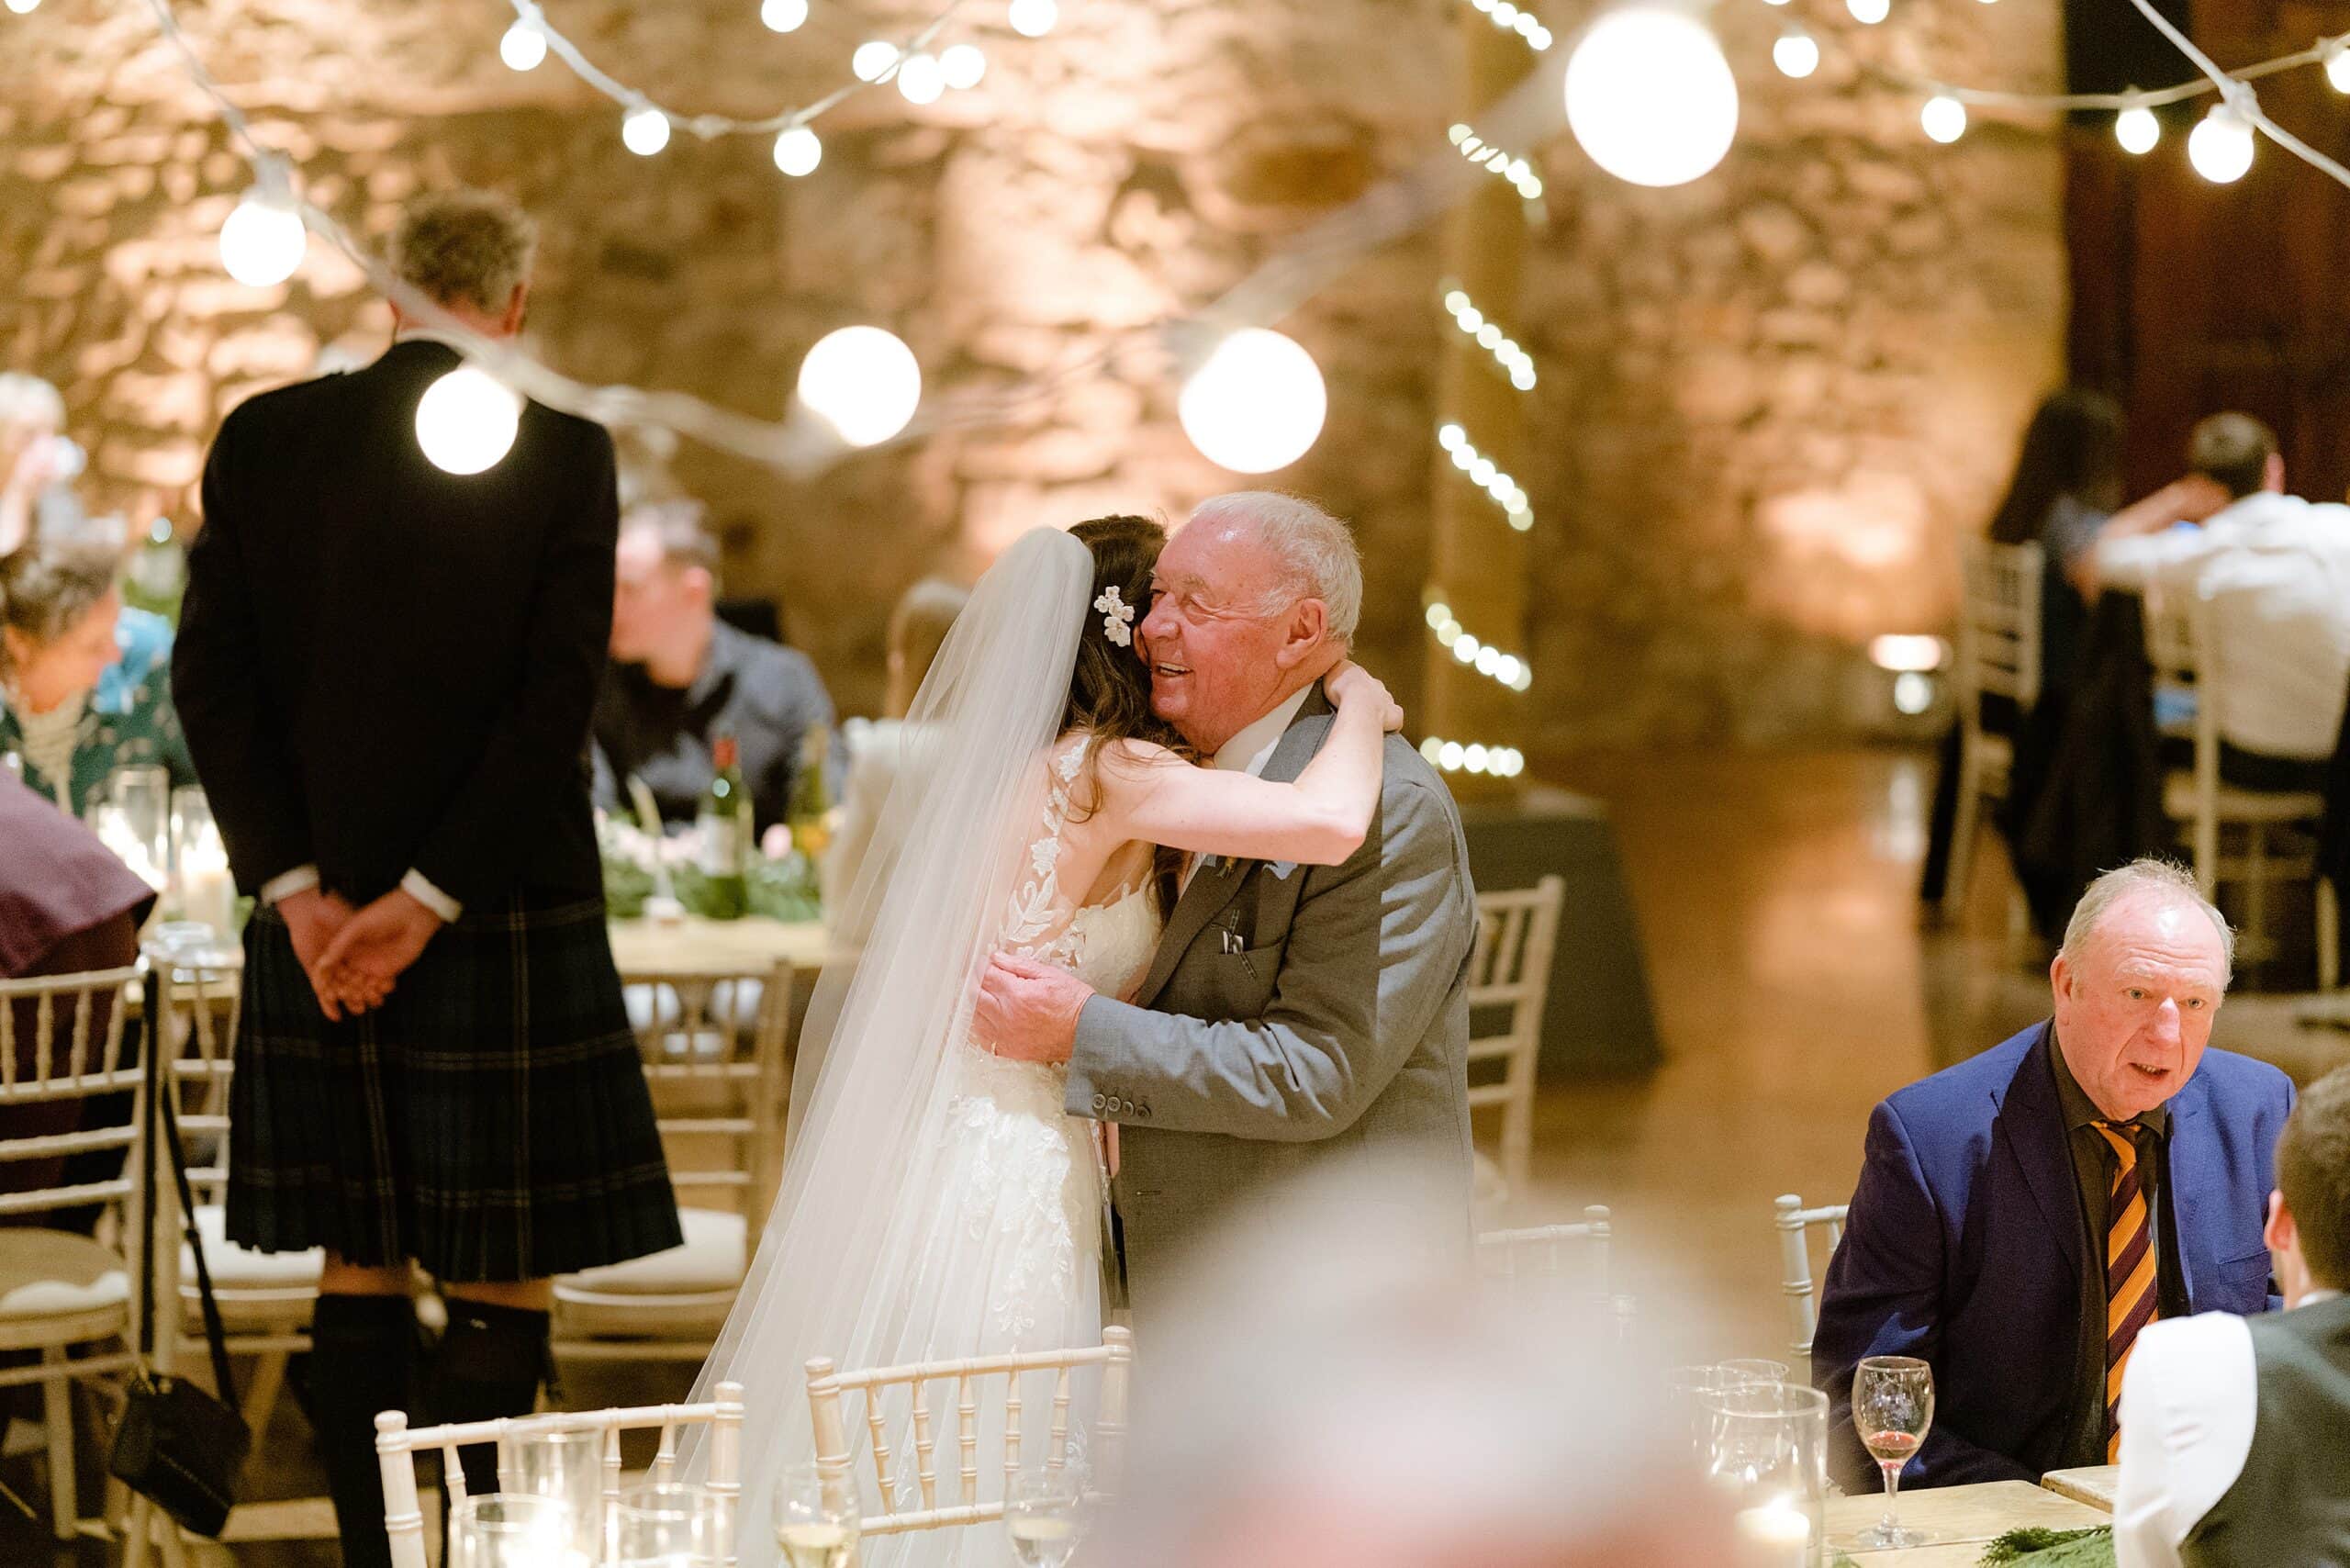 st andrews wedding photographer captures inside interior view a unique barn wedding venue in scotland showing the bride hugging a guest following her wedding ceremony with festoon lights above and in the background